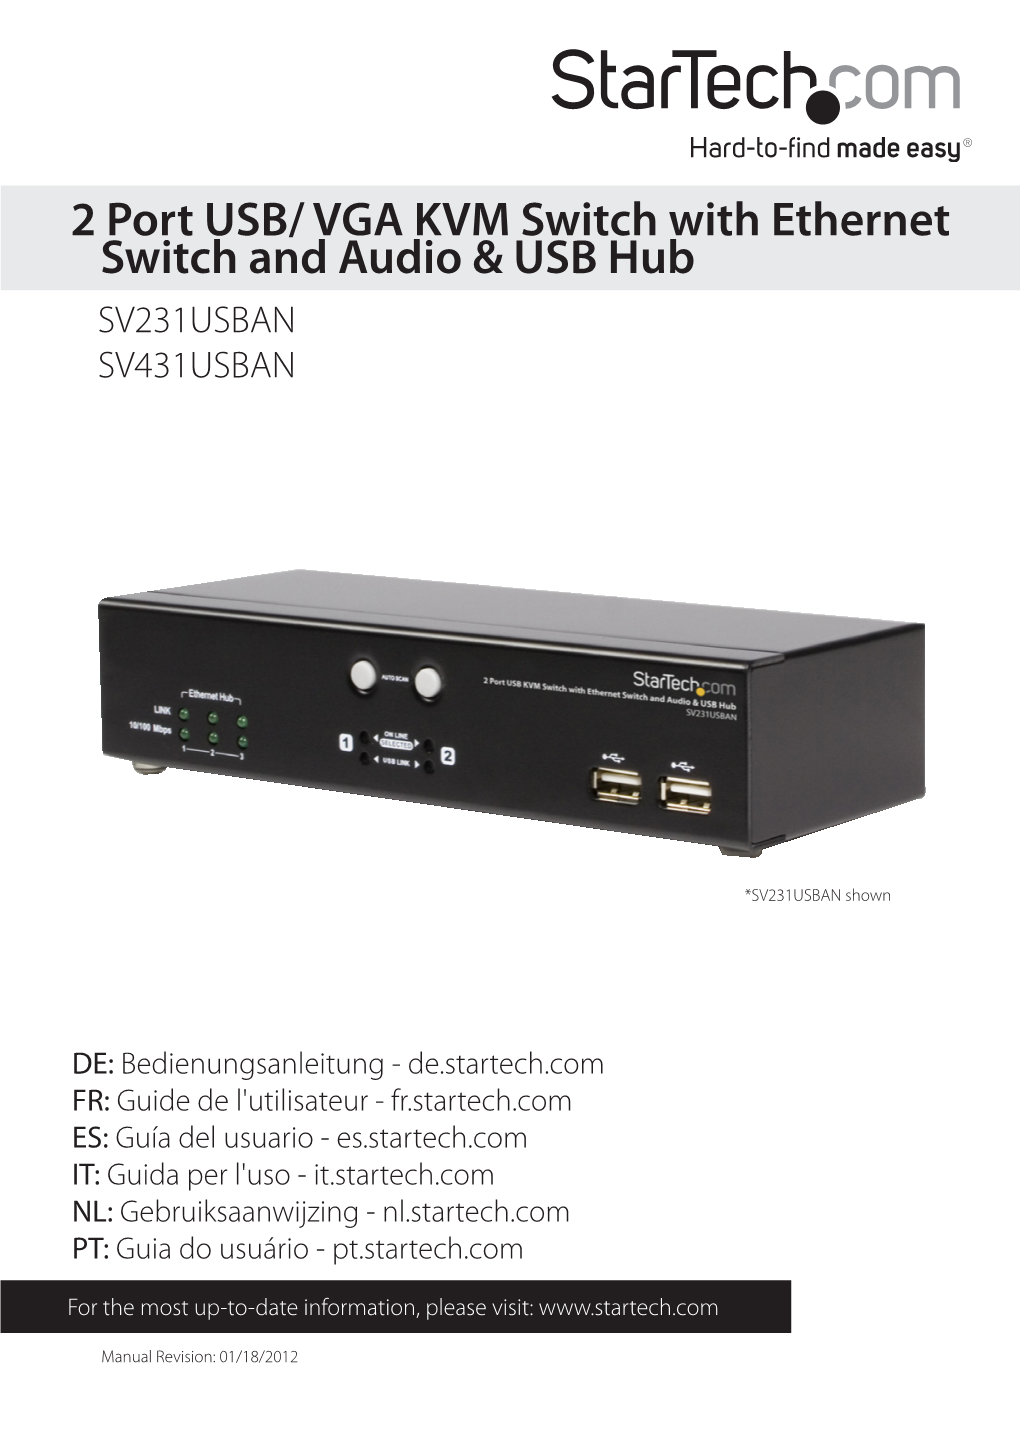 VGA KVM Switch with Ethernet Switch and Audio & USB